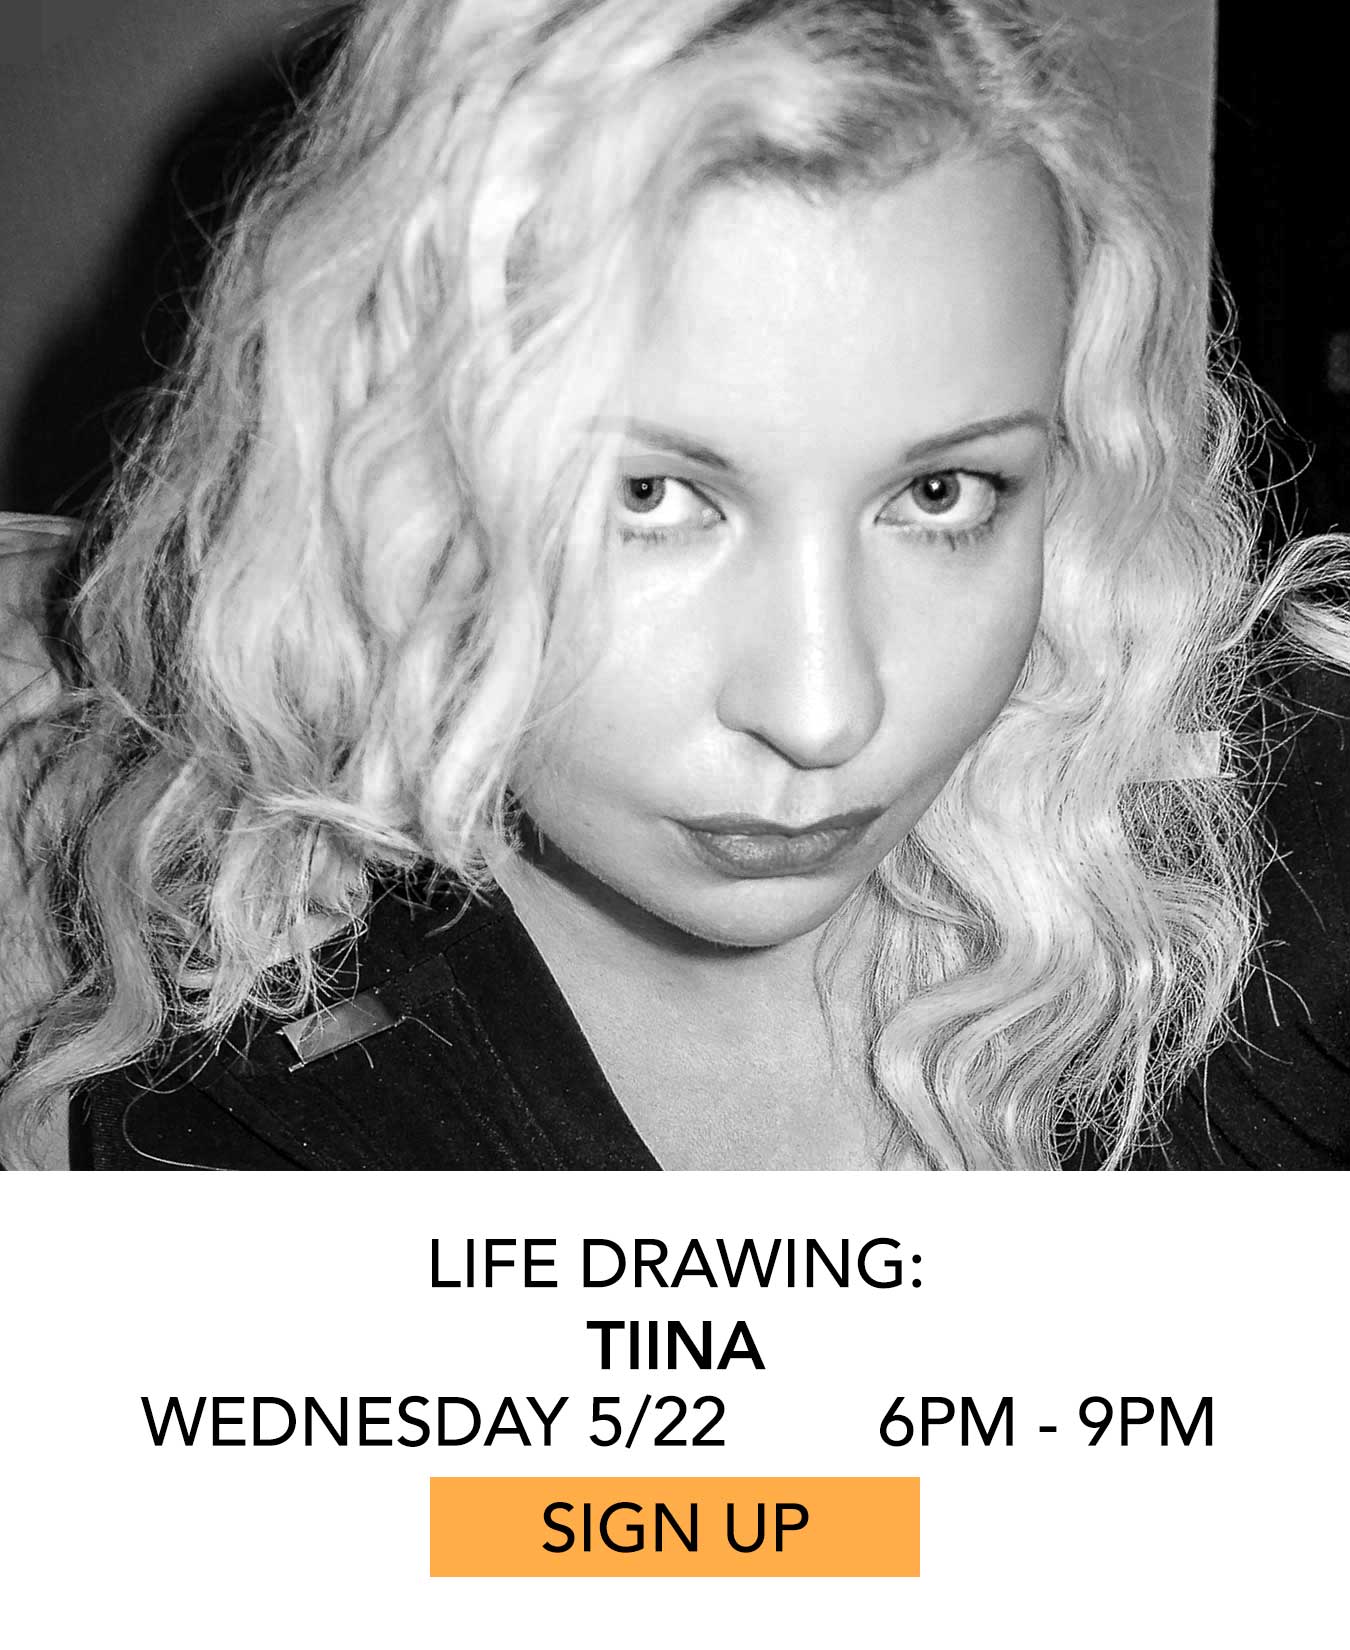 Life Drawing: Tiina. Wednesday 5/22 from 6pm to 9pm. Click to Sign Up.